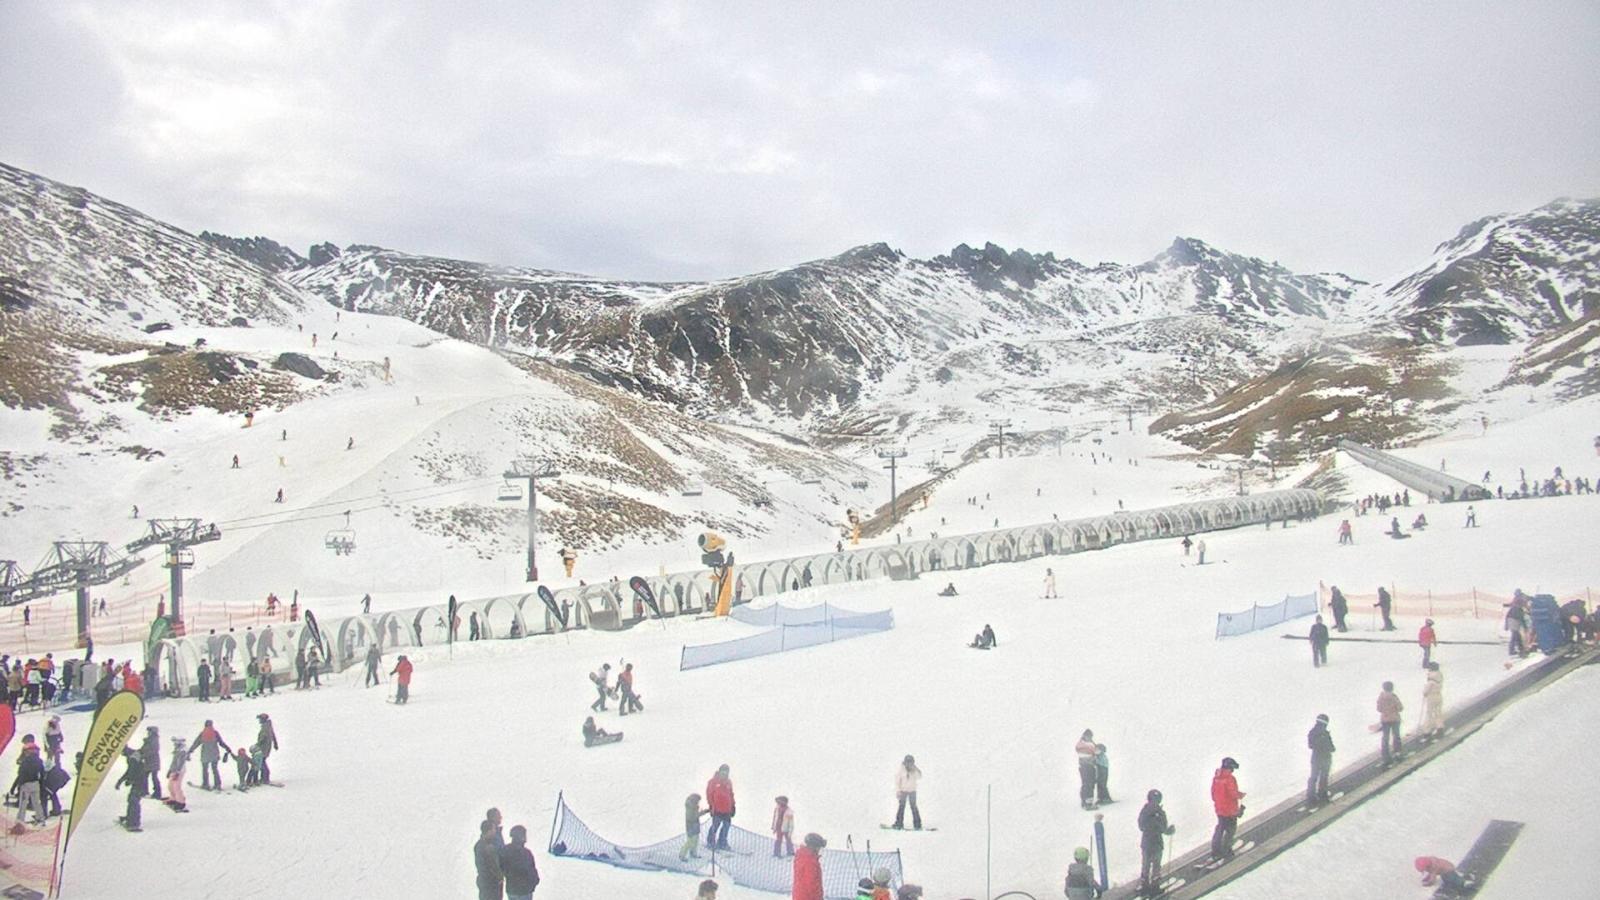 Webcam The Remarkables: Sugar bowl from base